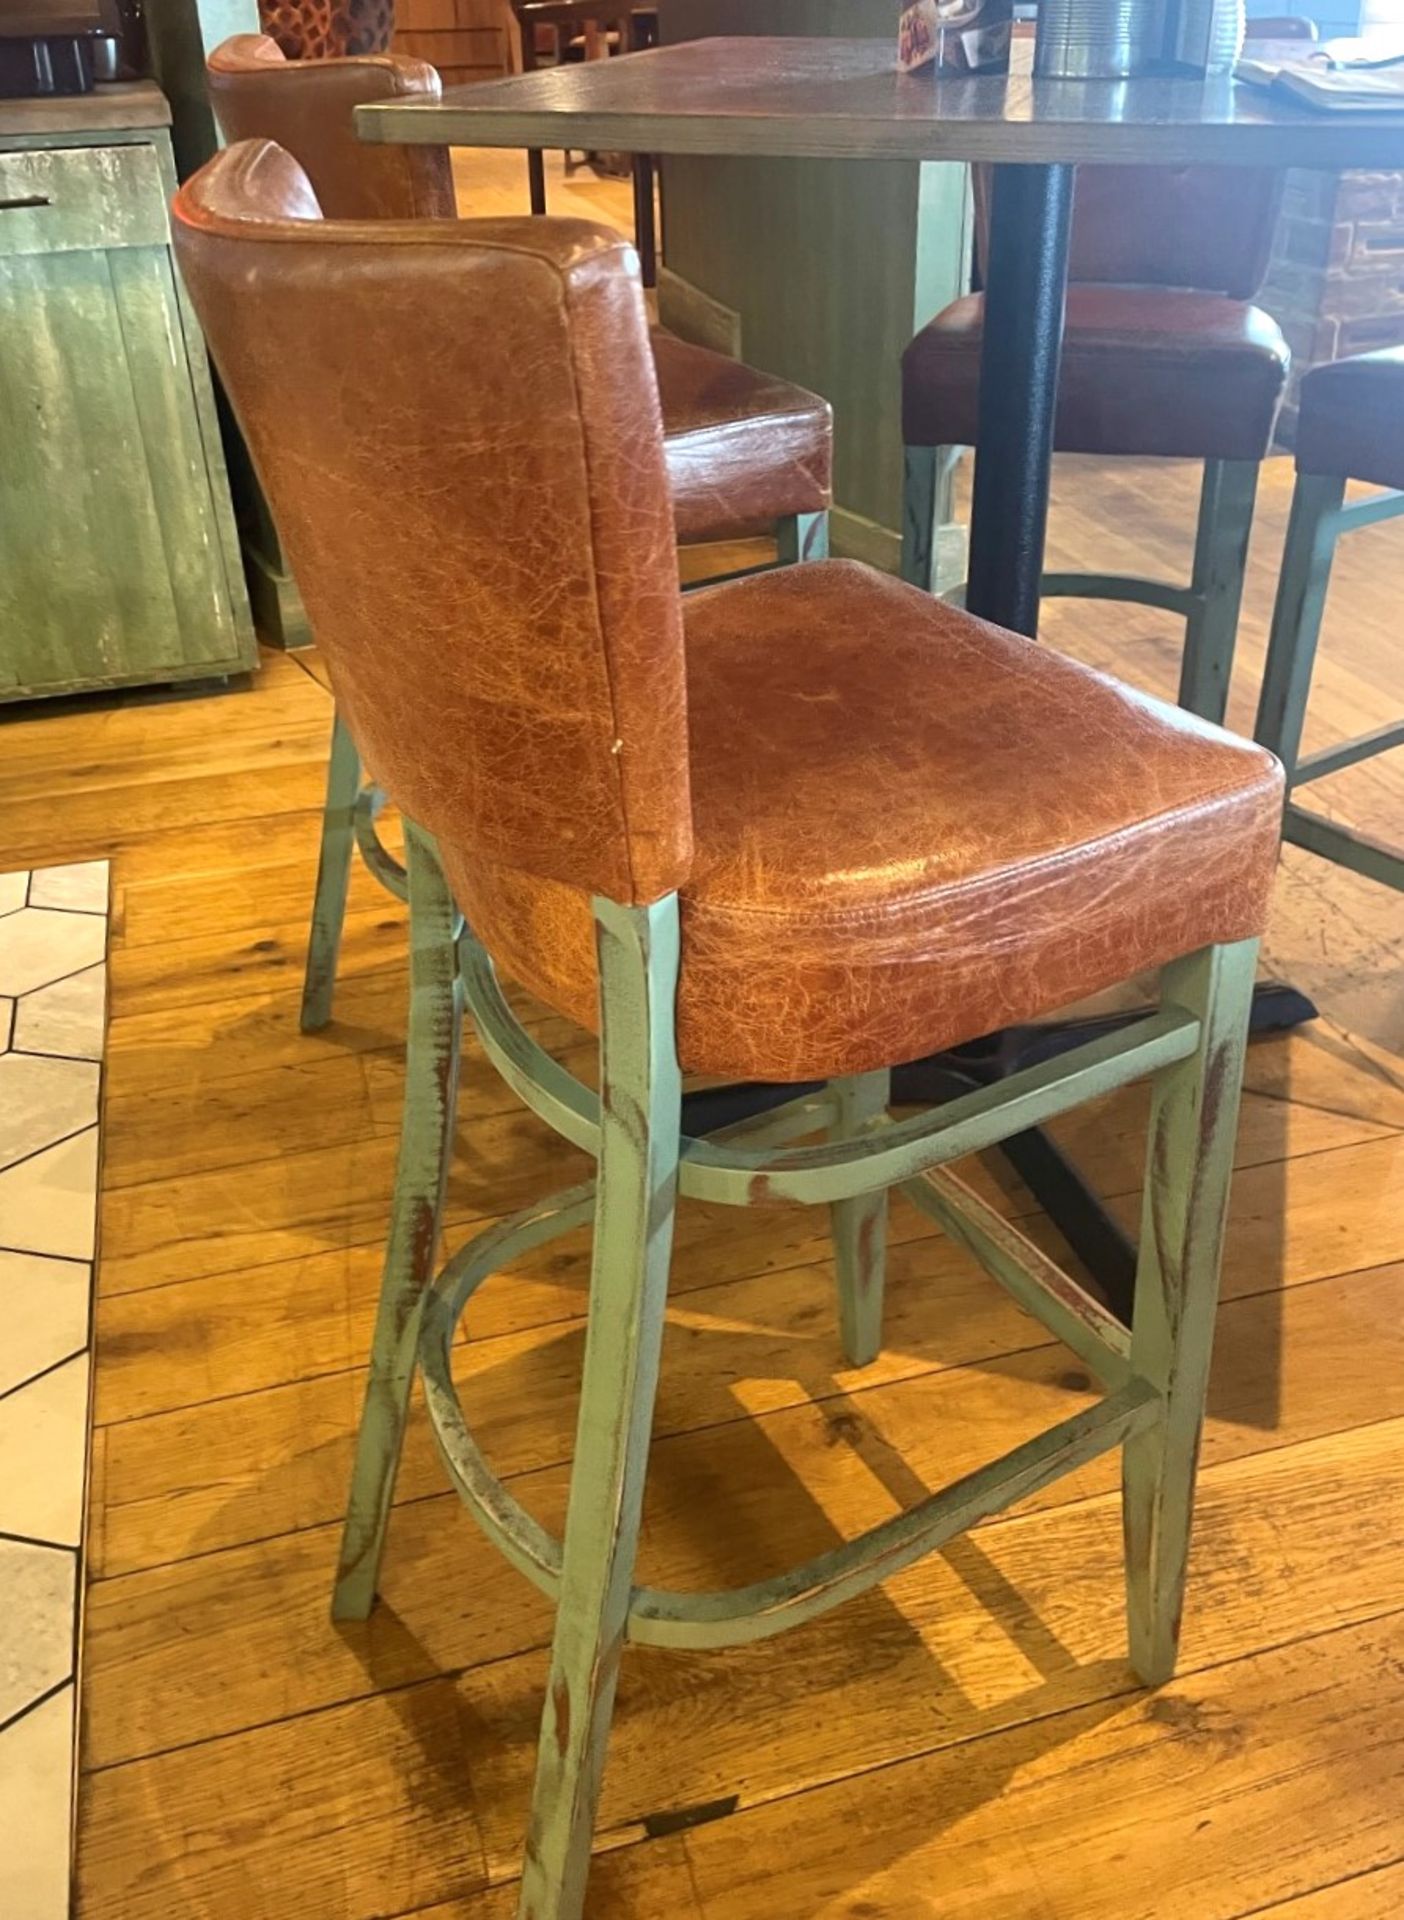 4 x Commercial Restaurant Bar Stools Featuring Wooden Frames With a Distressed Finish and Tan - Image 5 of 15